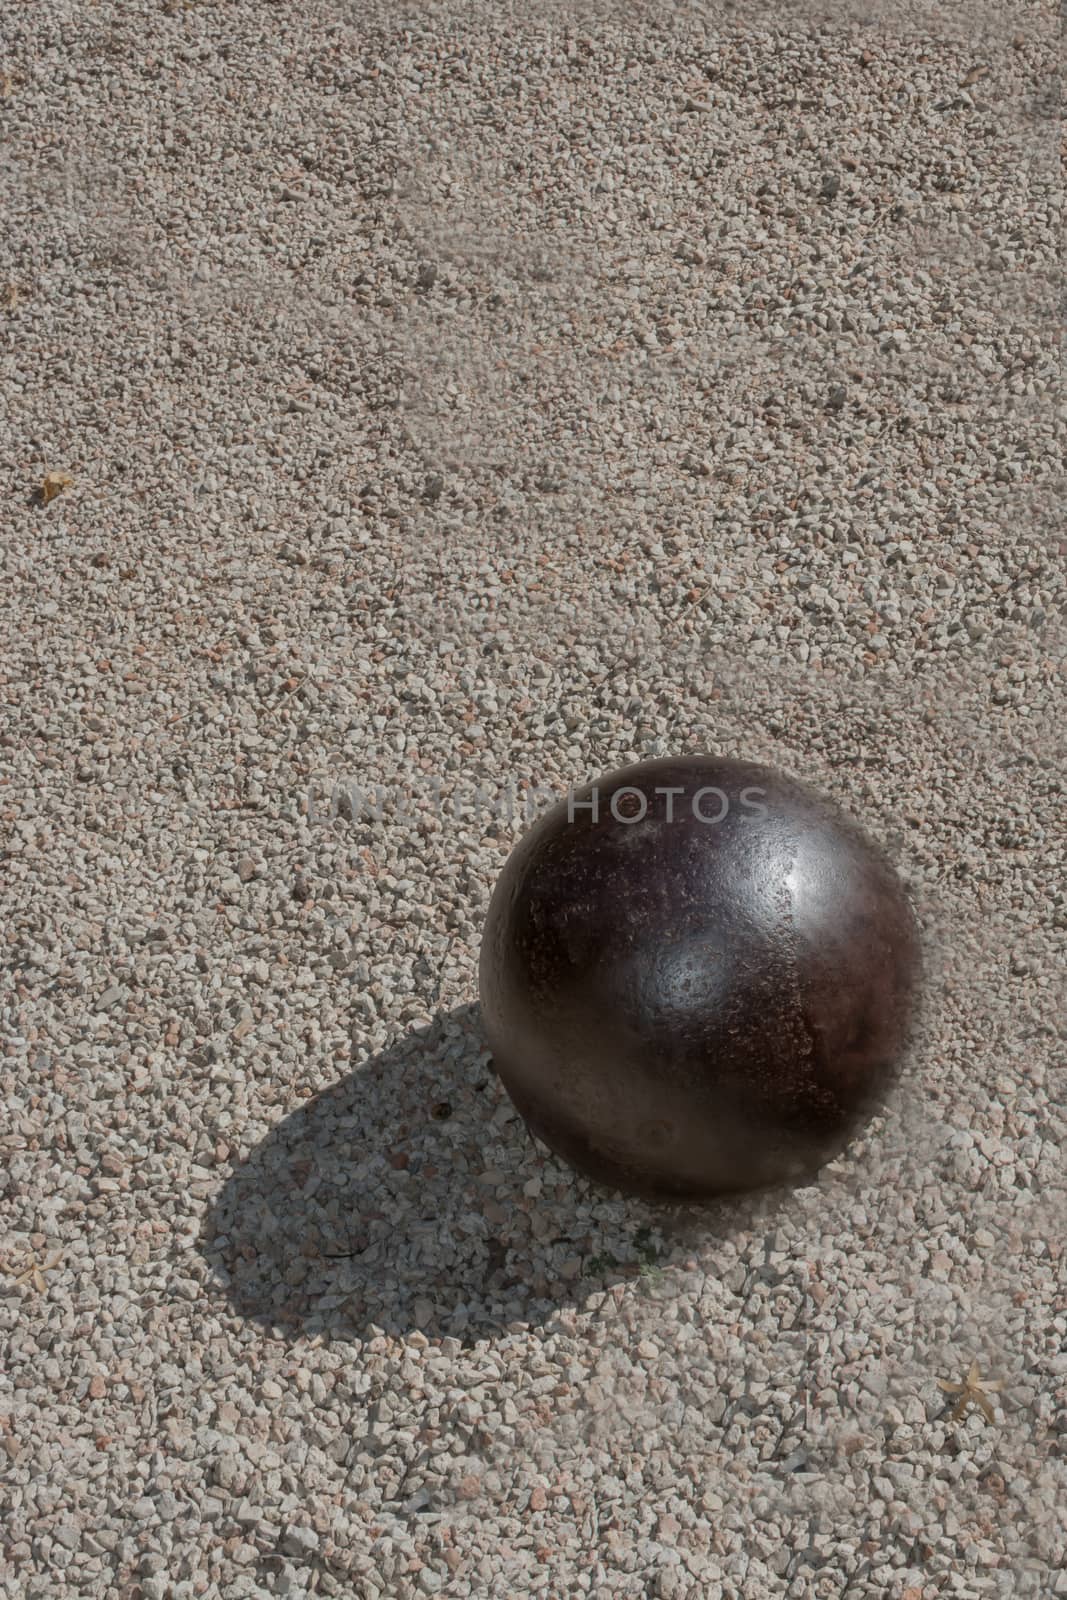 Iron ball on gravel with shadow